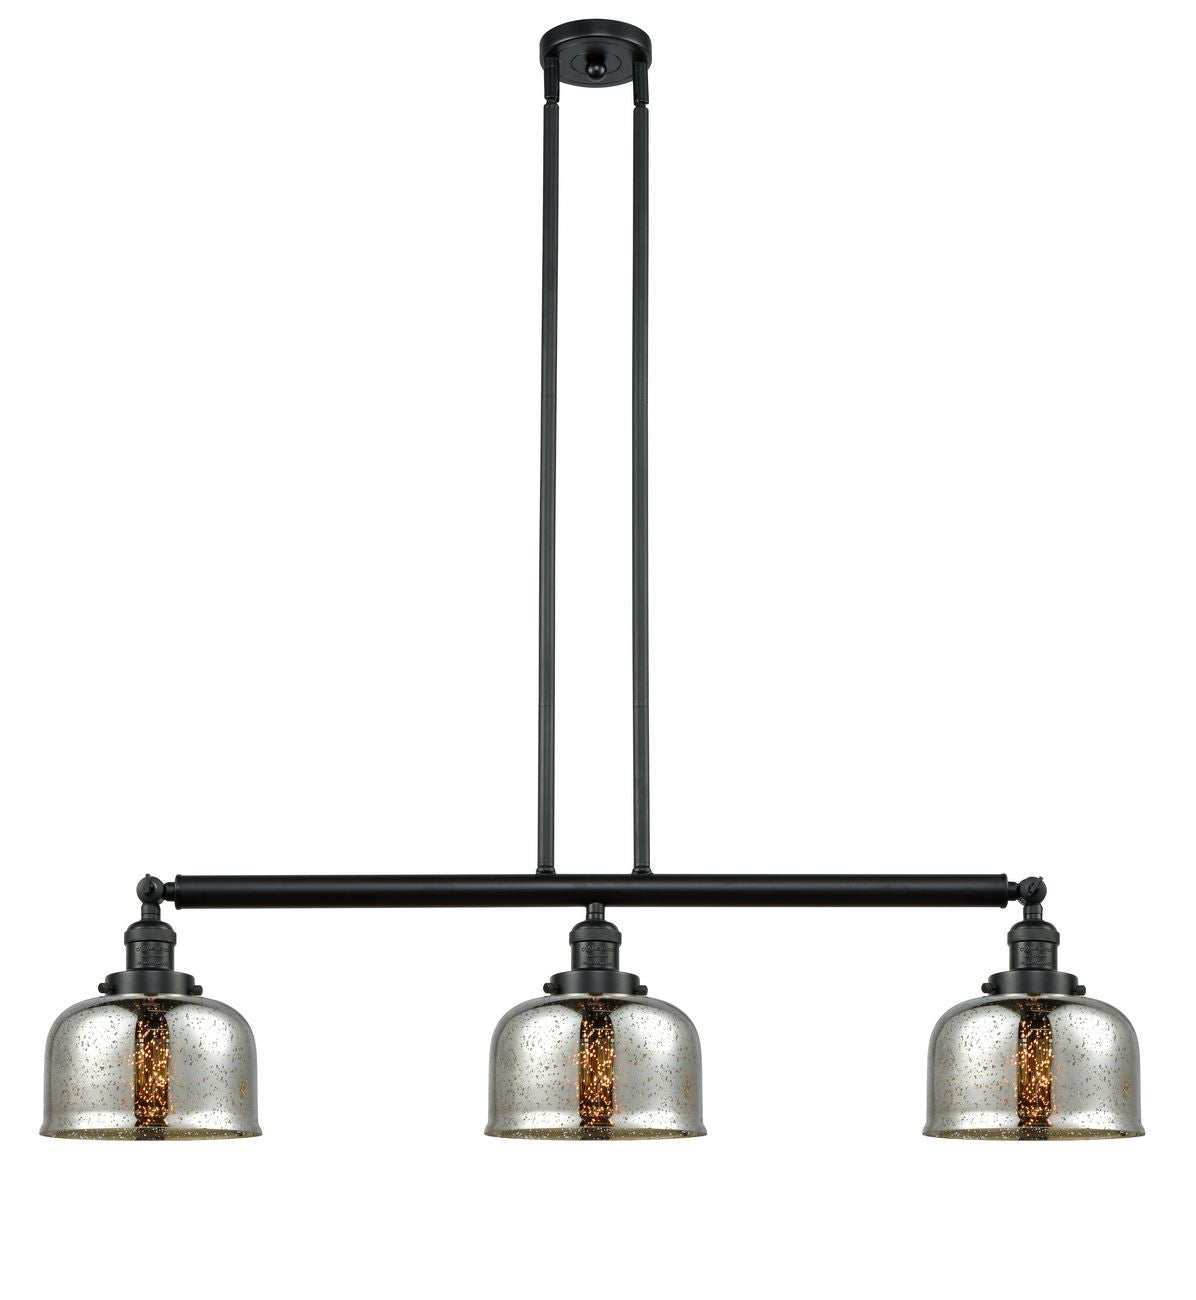 213-BK-G78 3-Light 40.5" Matte Black Island Light - Silver Plated Mercury Large Bell Glass - LED Bulb - Dimmensions: 40.5 x 8 x 13<br>Minimum Height : 20<br>Maximum Height : 44 - Sloped Ceiling Compatible: Yes